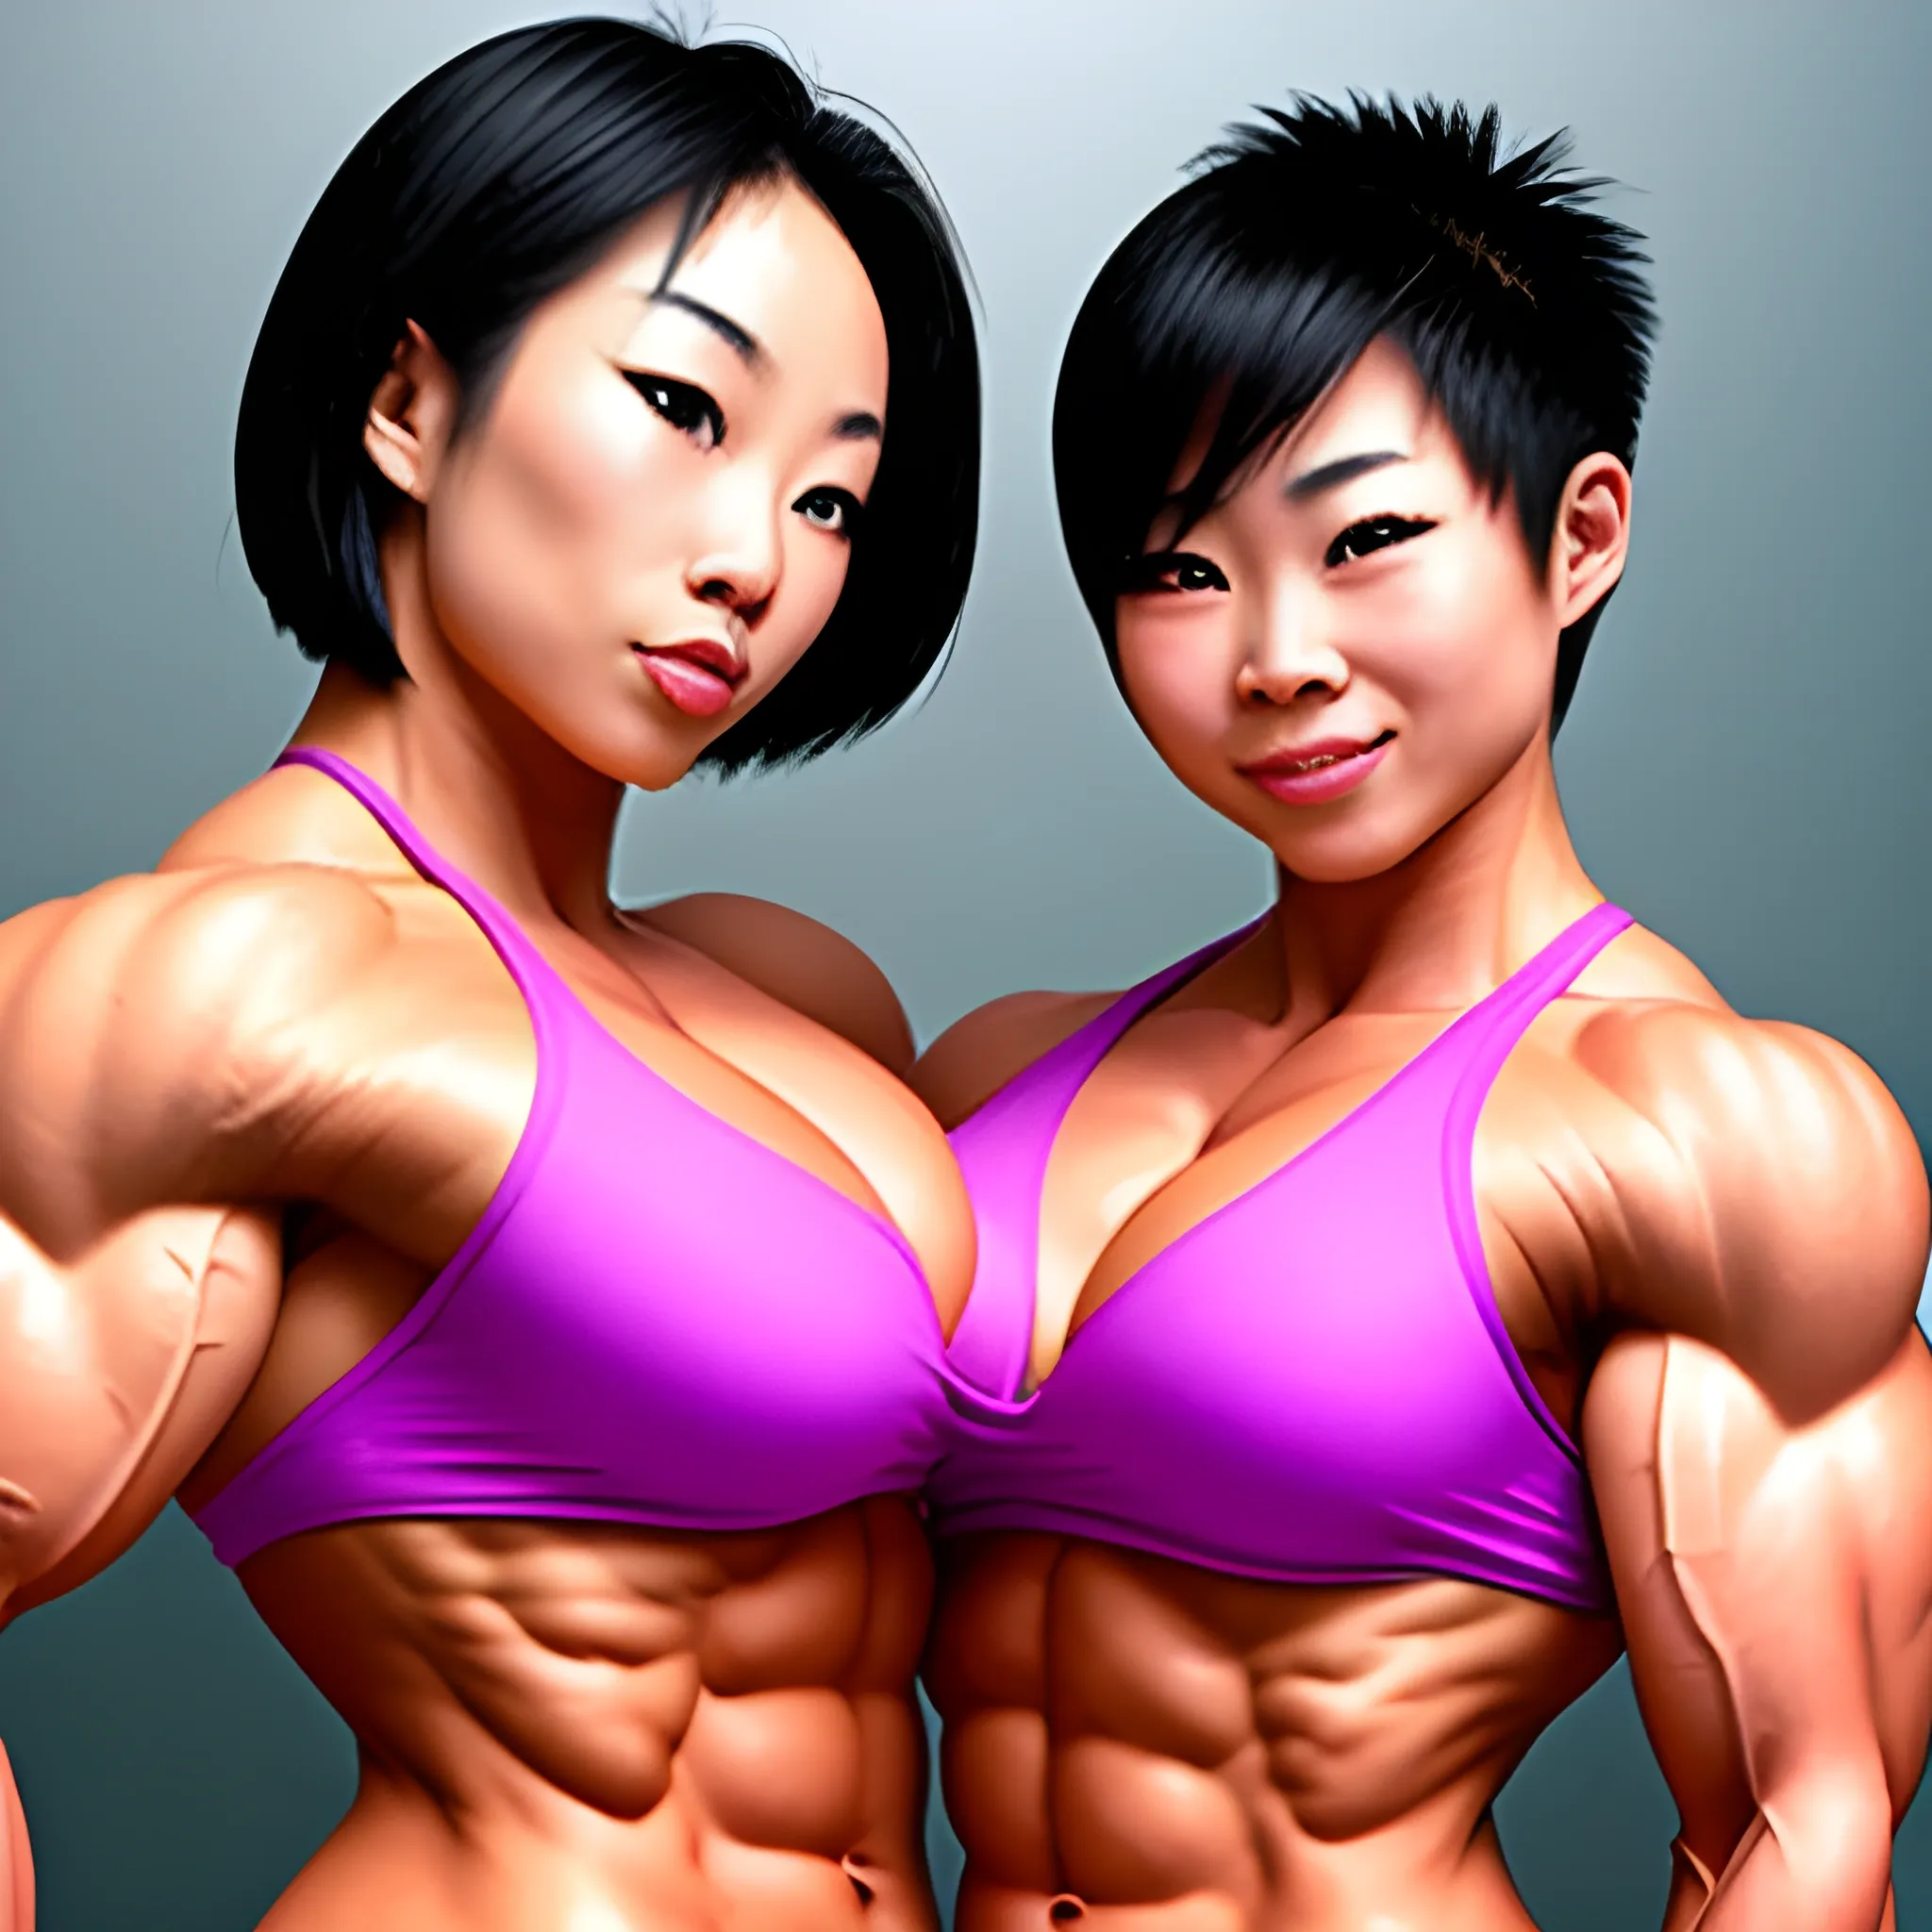 Two sexy Asian female bodybuilders kissing. They have short hair 